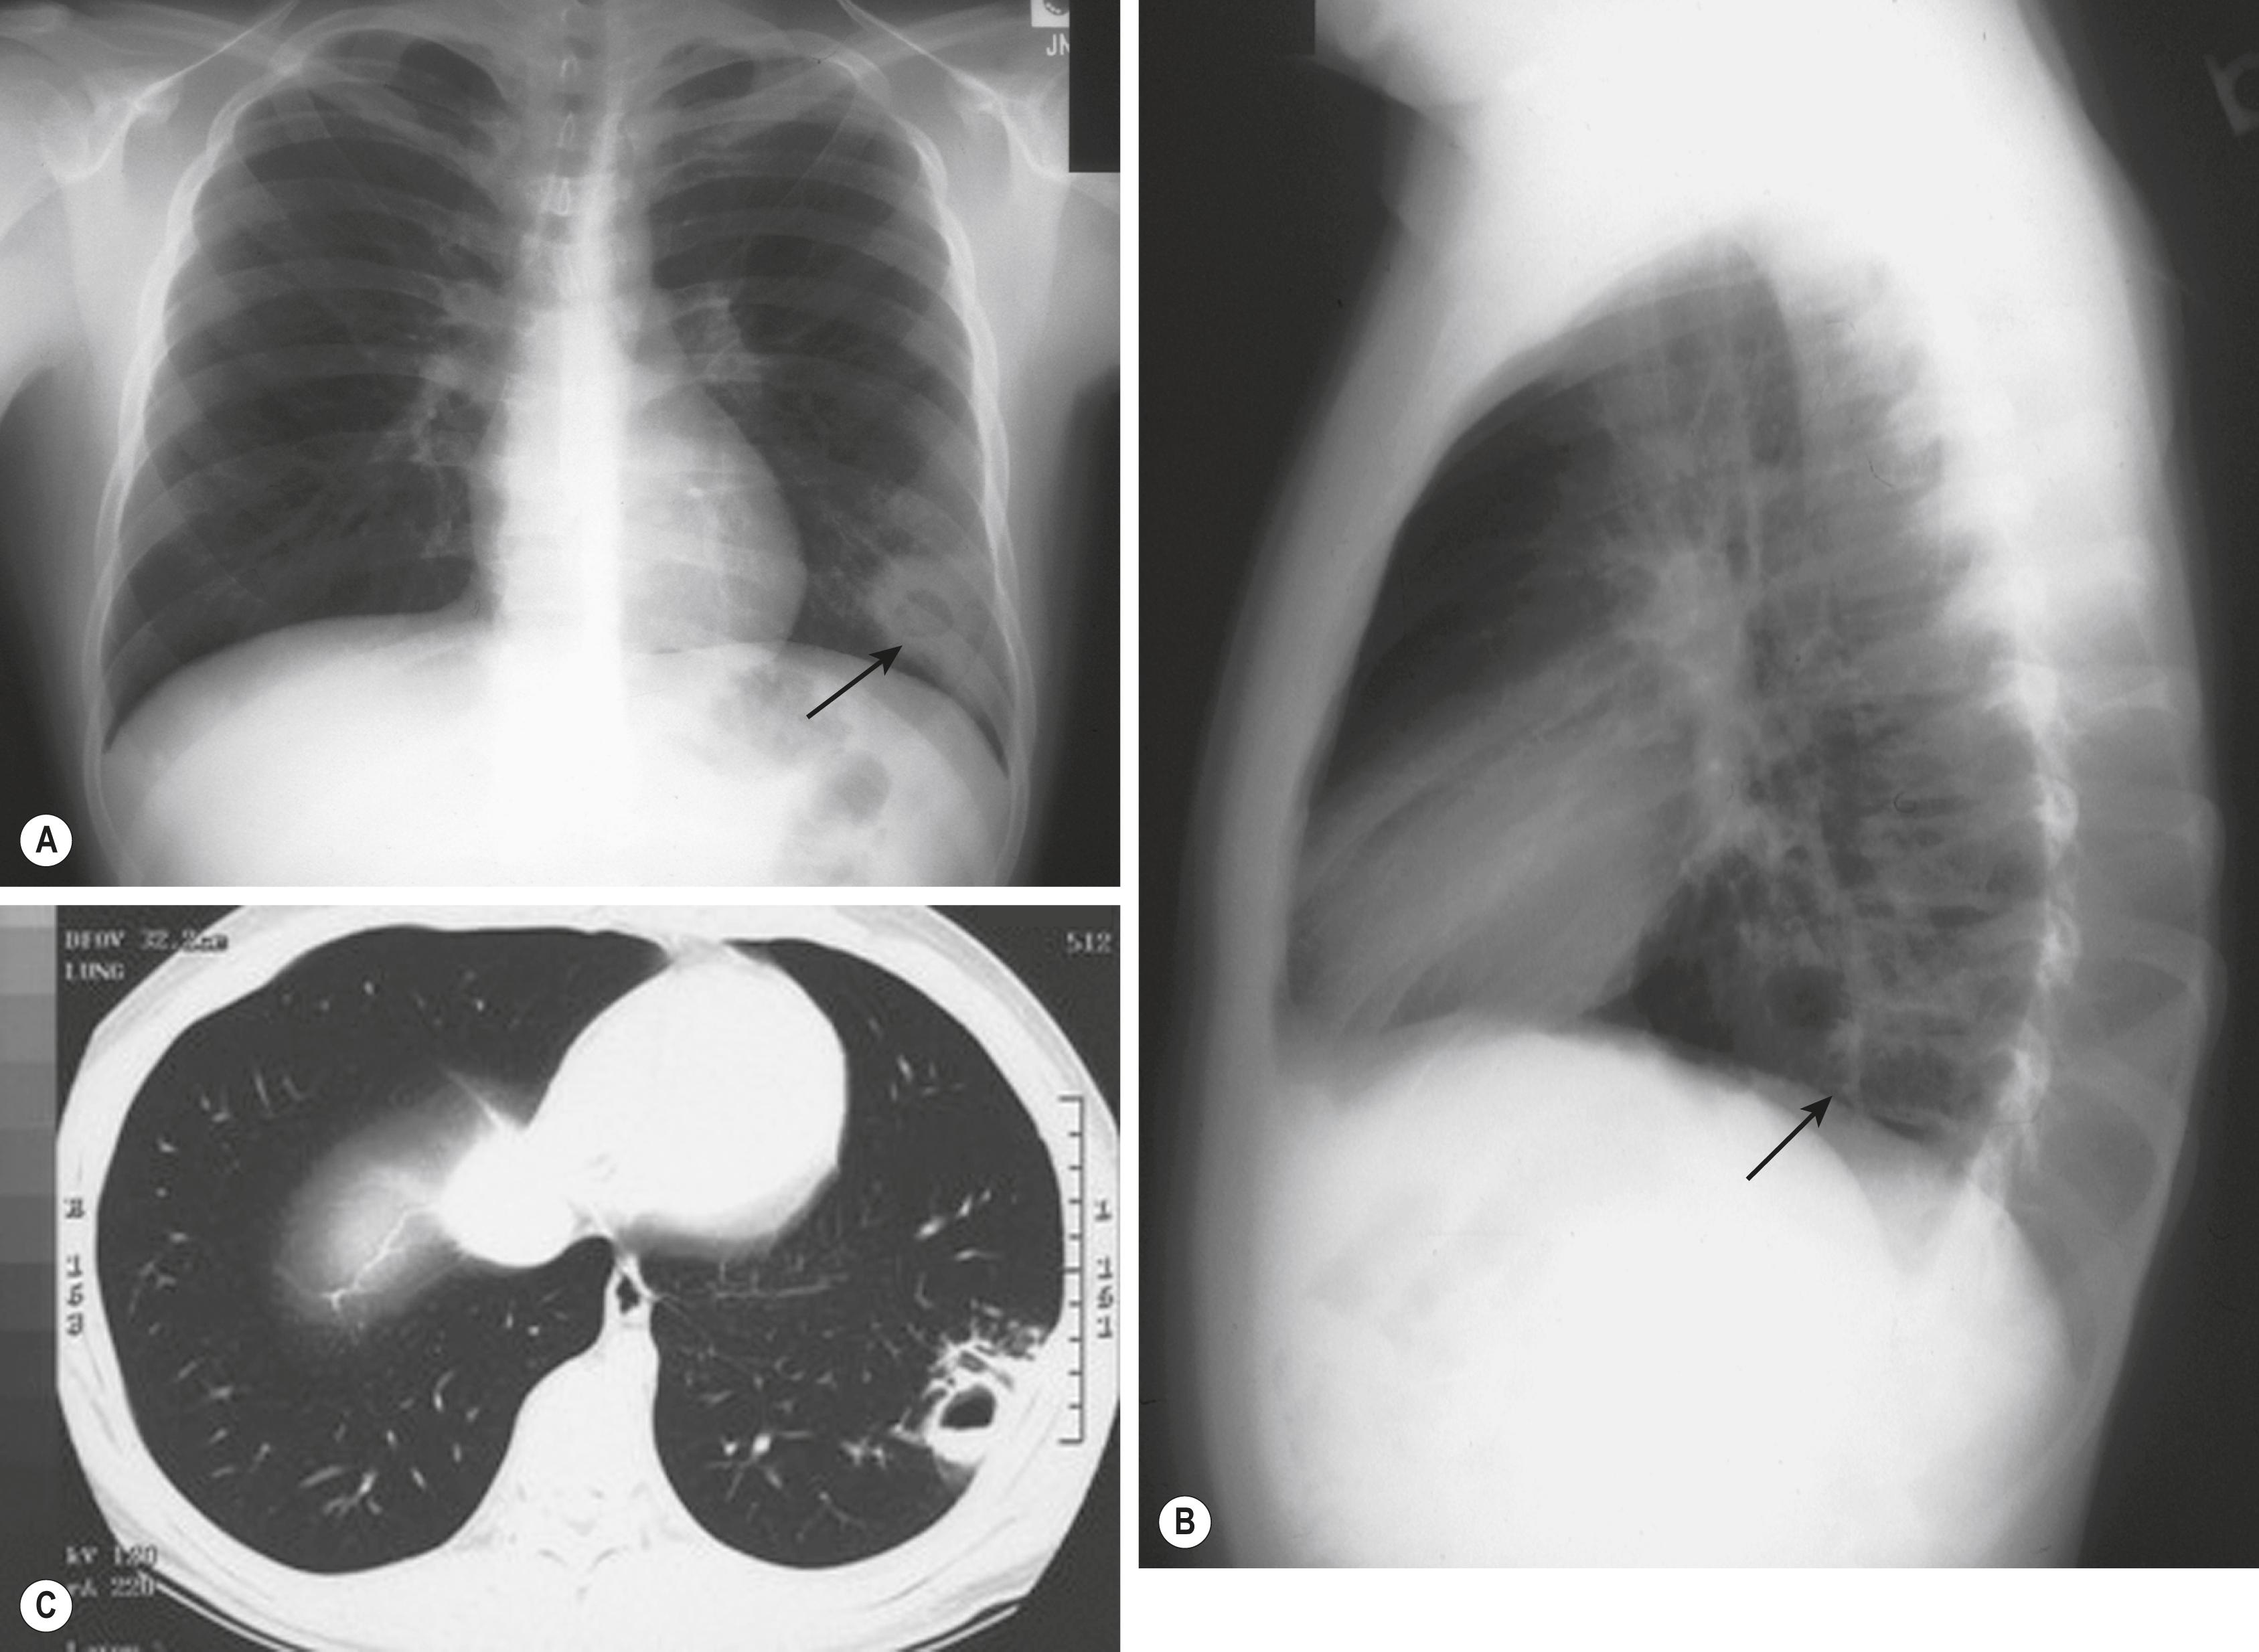 Figure 253.4, A 14-year-old boy with type 2 diabetes mellitus had a 6-month history of occasional chest pain and 13.6 kg (30 lb) weight loss. Chest radiographs (A and B) show peripheral left lower-lobe lung abscess (arrows) ; computed tomography (lung window) shows air–fluid level (C). Aspirate yielded growth of Coccidioides immitis.